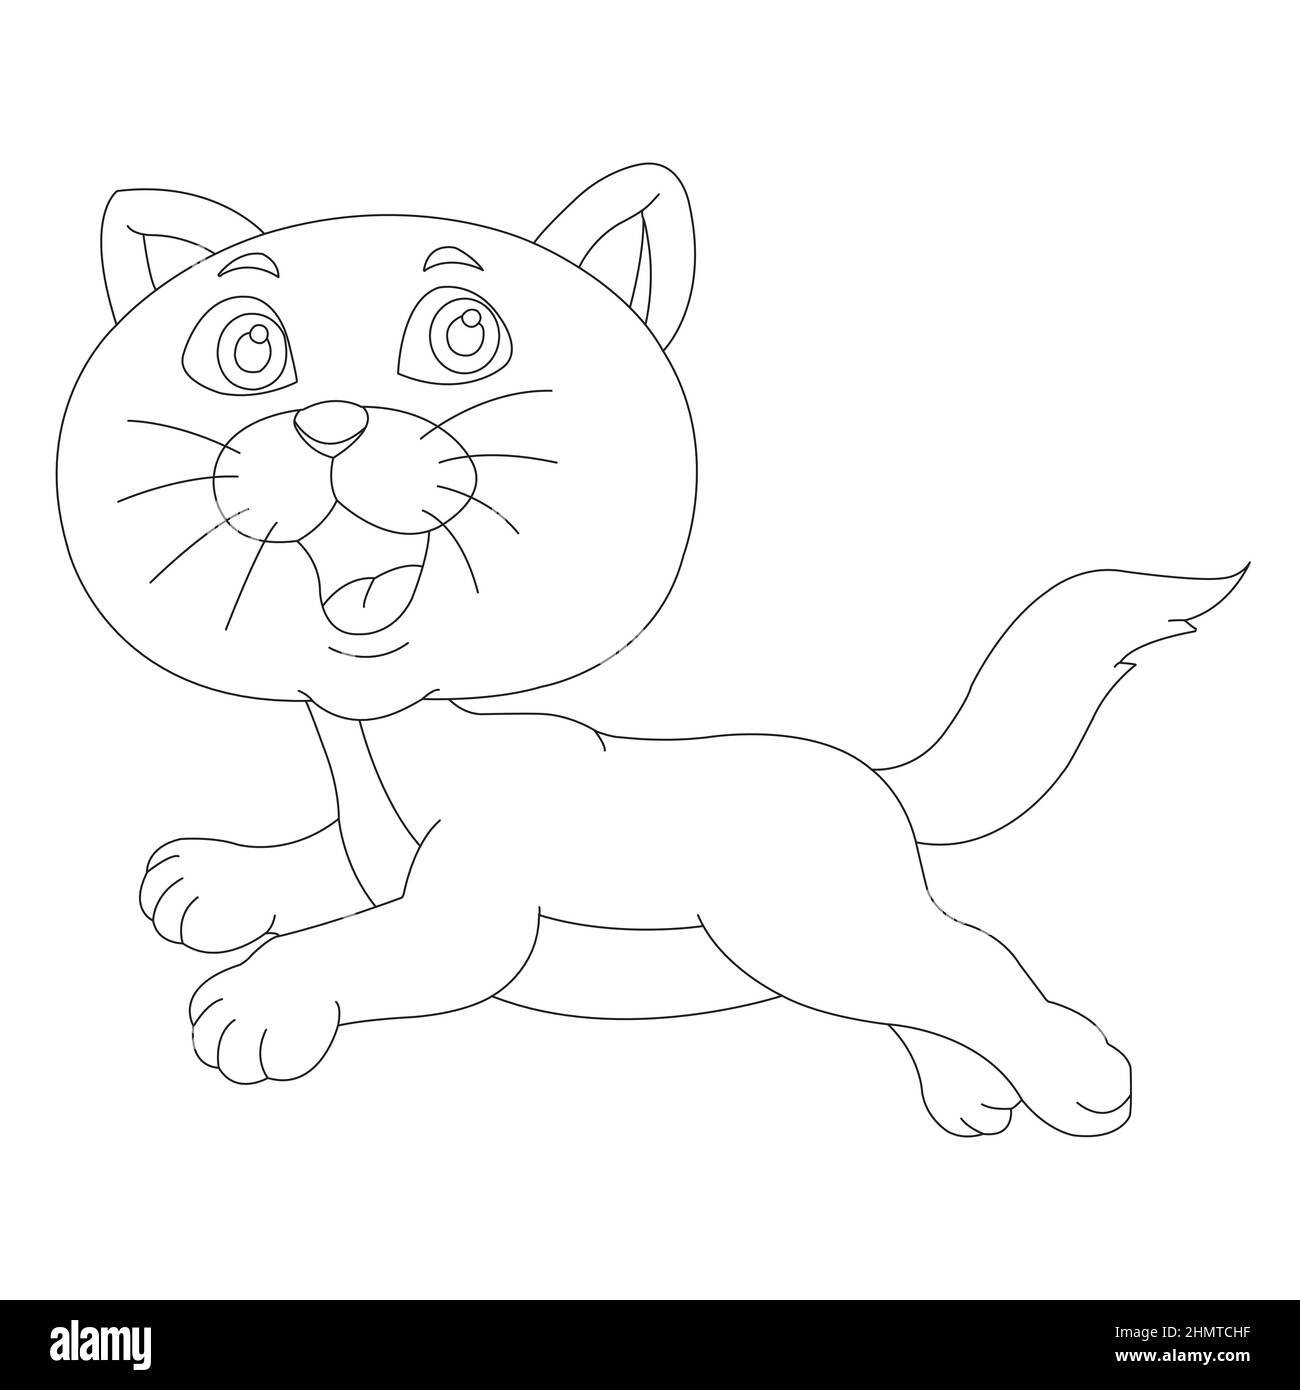 Coloring page outline of cute cat Animal Coloring page cartoon vector illustration Stock Vector